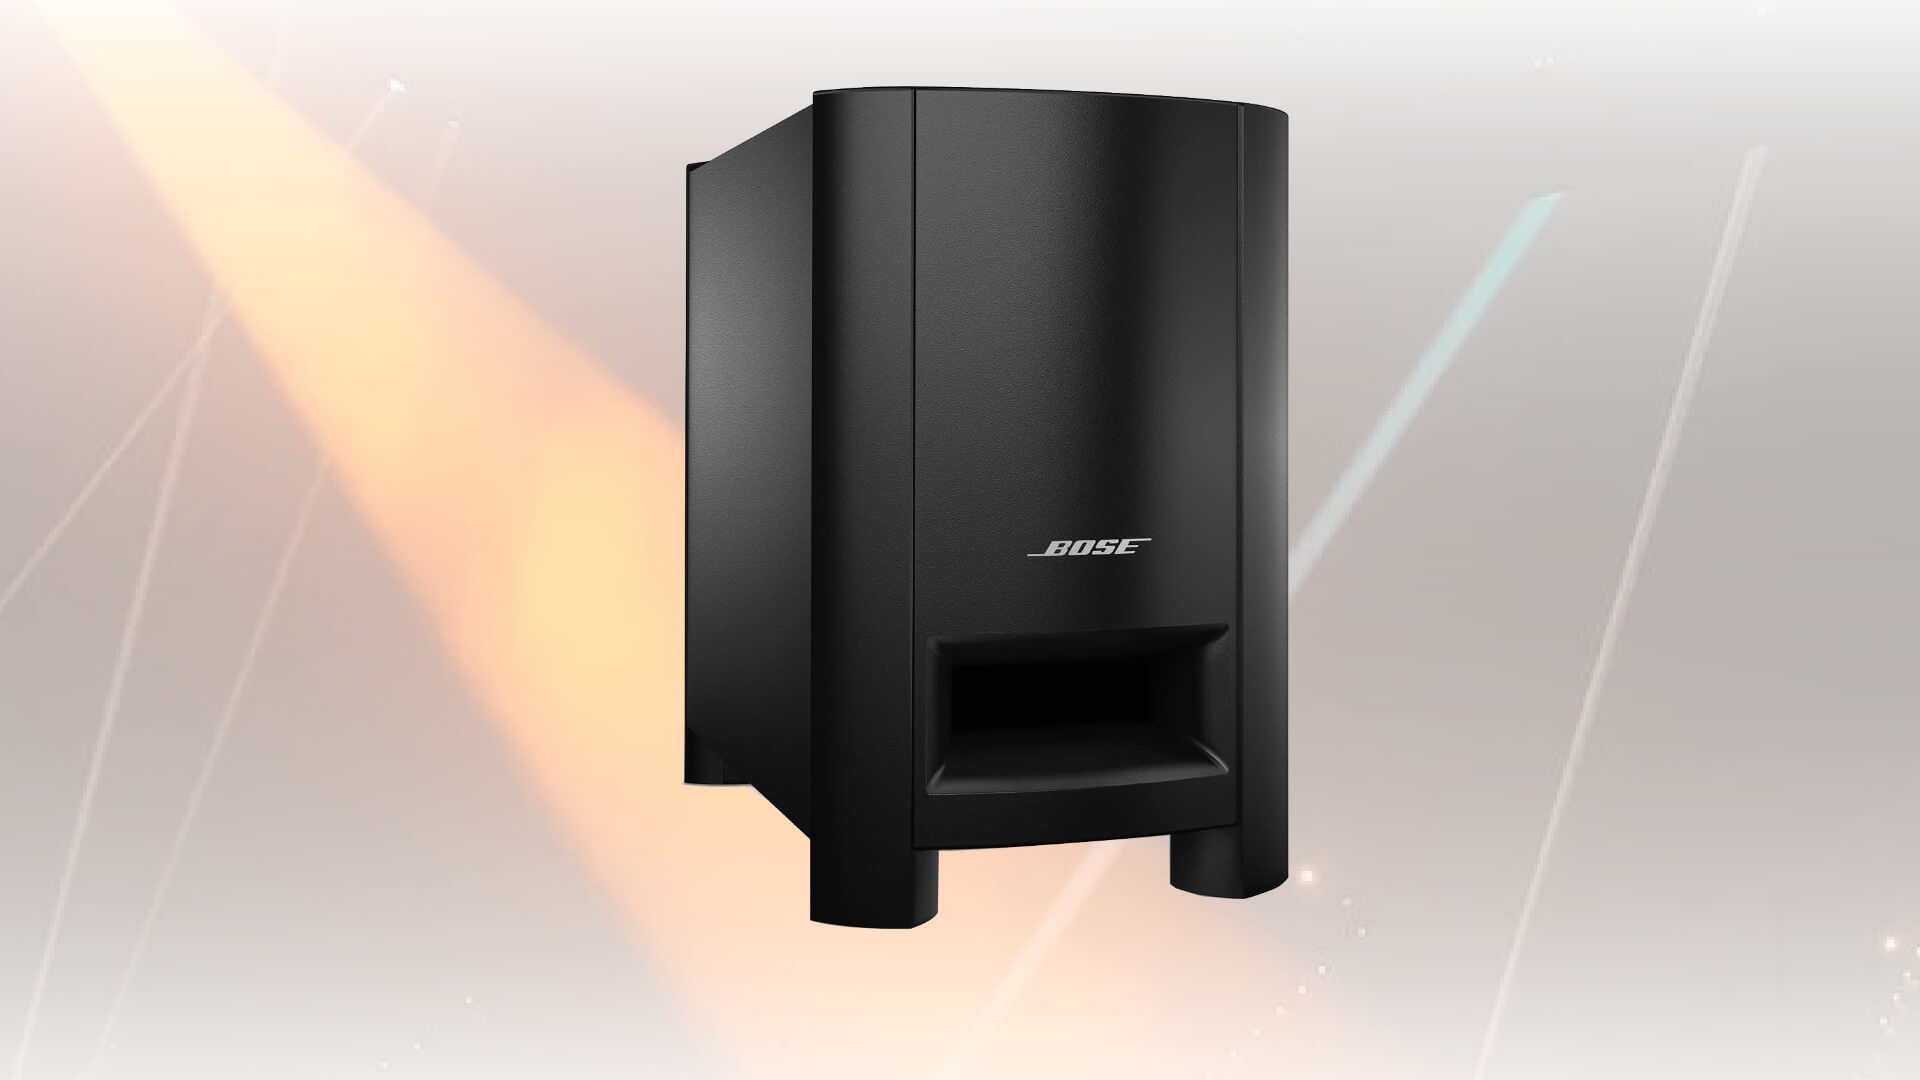 Bose CineMate 15 Home Theater Speaker System Review